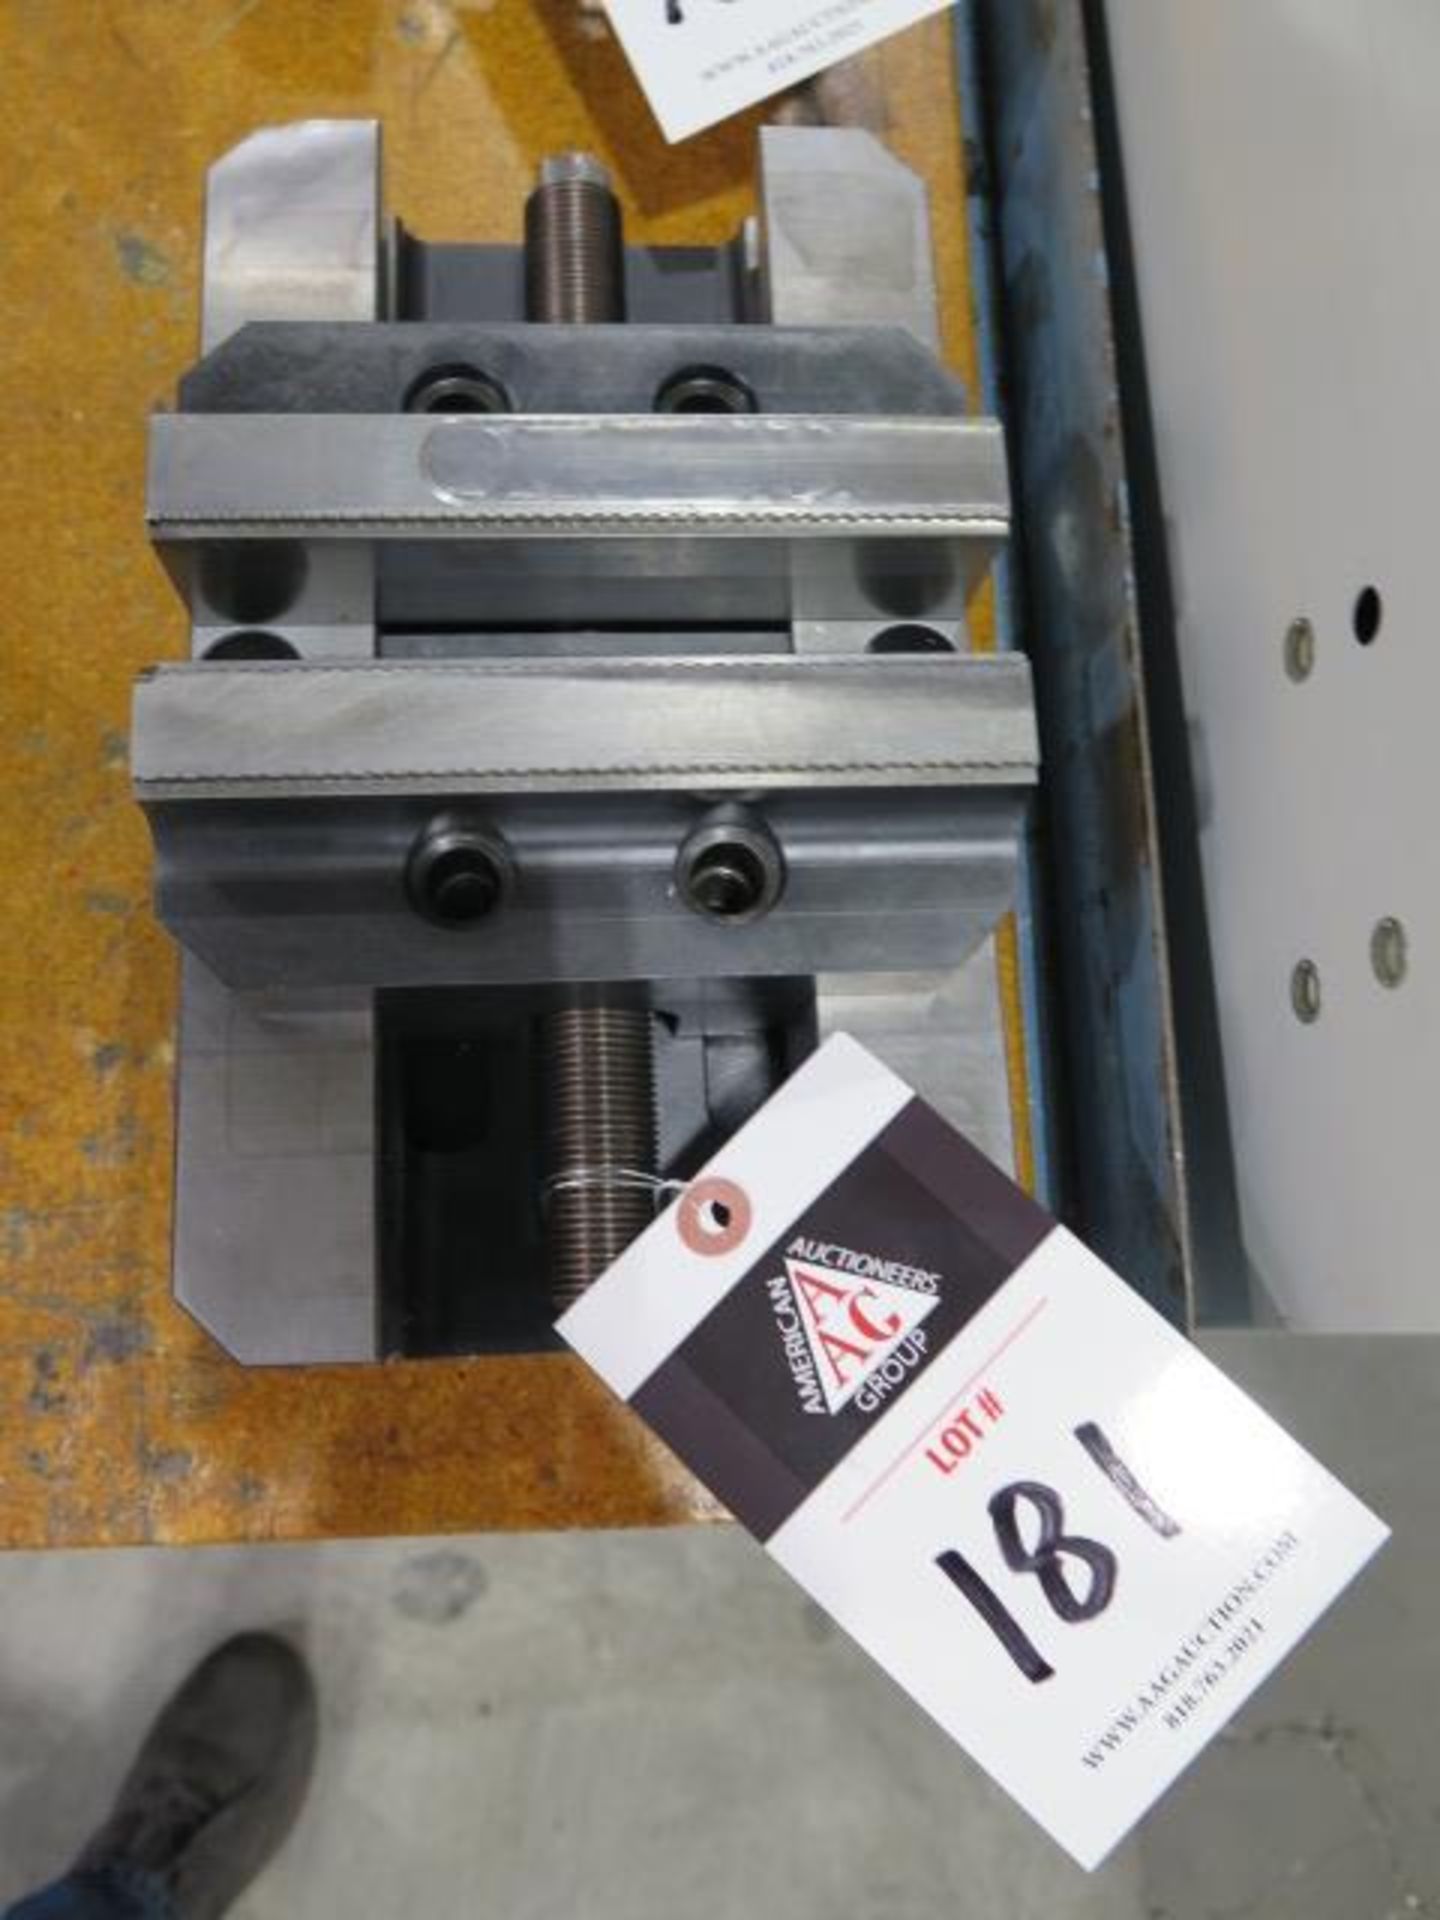 5th Axis V6105 6" Vise (SOLD AS-IS - NO WARRANTY)